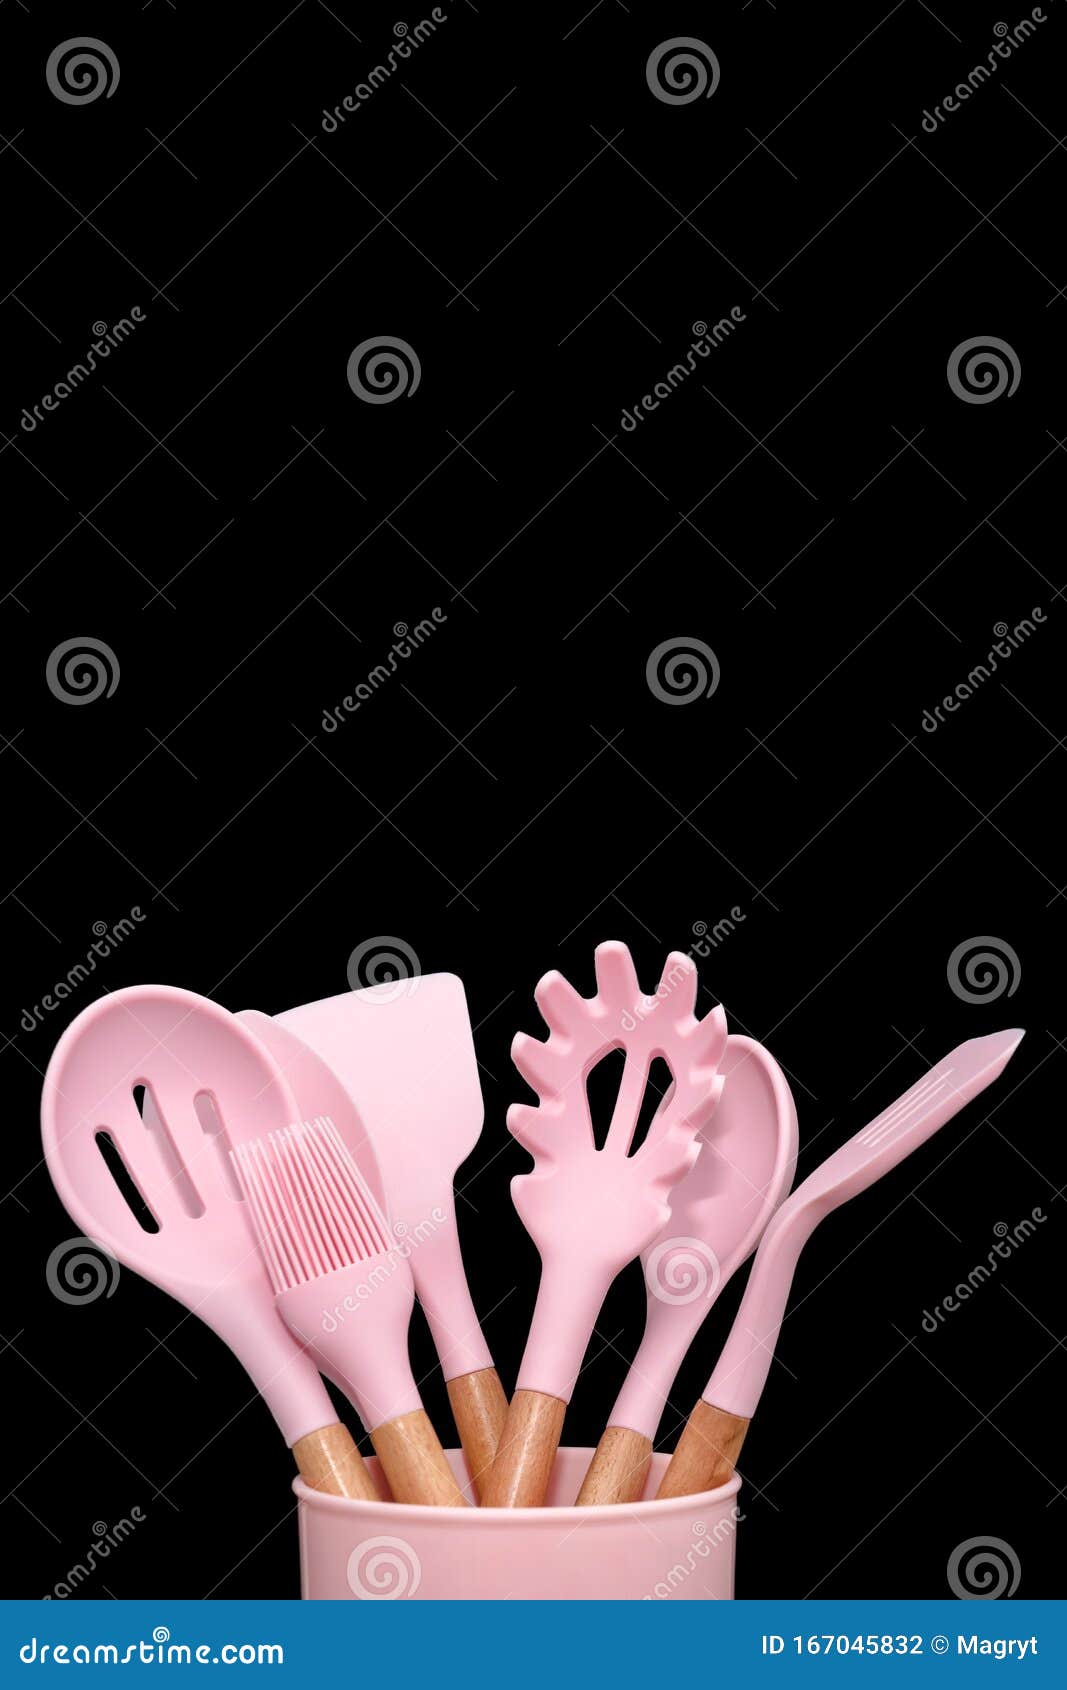 Kitchen utensils background with copyspace, home kitchen decor concept, kitchen  tools, rubber accessories in container. Restaurant, cooking, culinary,  kitchen theme. Silicone spatulas and brushes Stock Photo